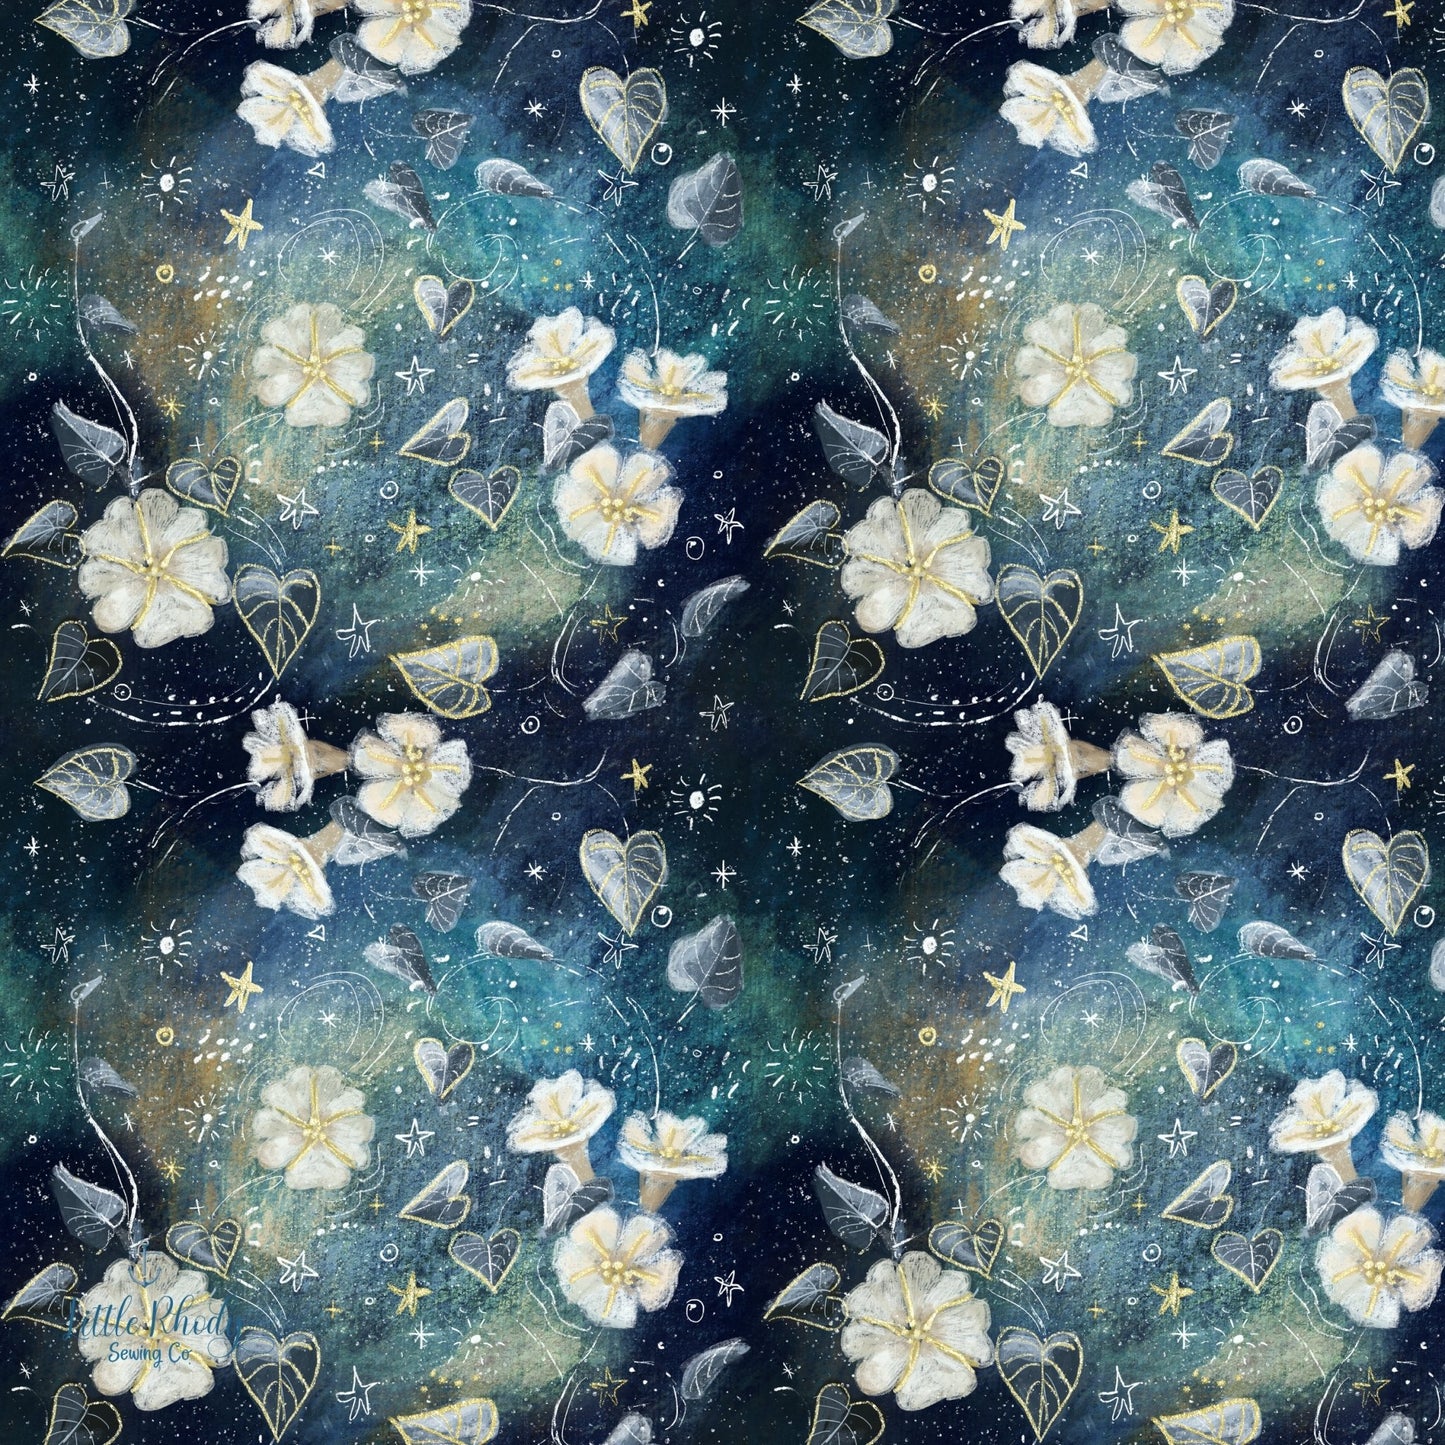 Moonflowers at Night - Tatra Cottage - Cotton Lycra Jersey - By the 1/2 Yard - Little Rhody Sewing Co.